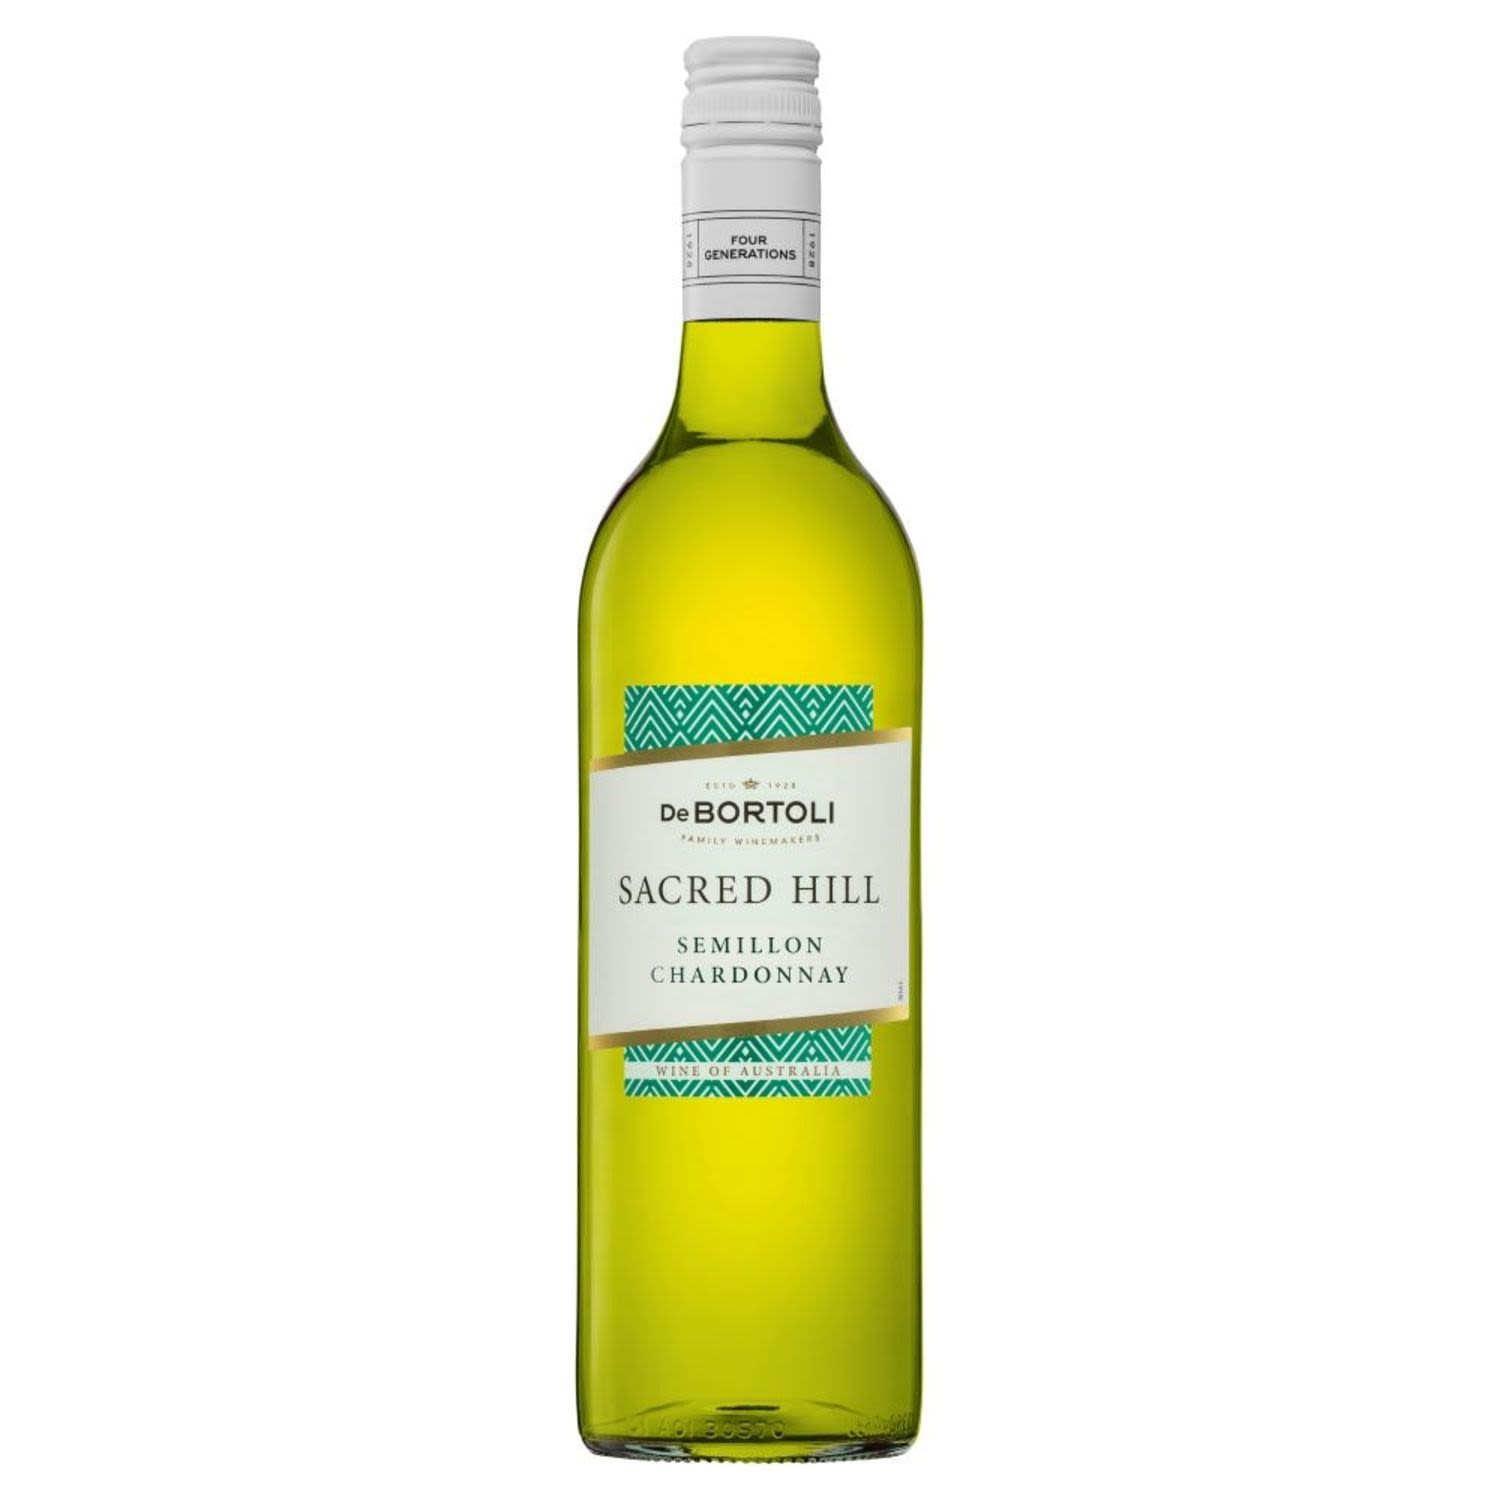 Restrained aromatics, fresh stone fruit bouquet, balanced acidity and a creamy oak finish.<br /> <br />Alcohol Volume: 12.00%<br /><br />Pack Format: Bottle<br /><br />Standard Drinks: 7.1</br /><br />Pack Type: Bottle<br /><br />Country of Origin: Australia<br /><br />Region: South Eastern Australia<br /><br />Vintage: Vintages Vary<br />